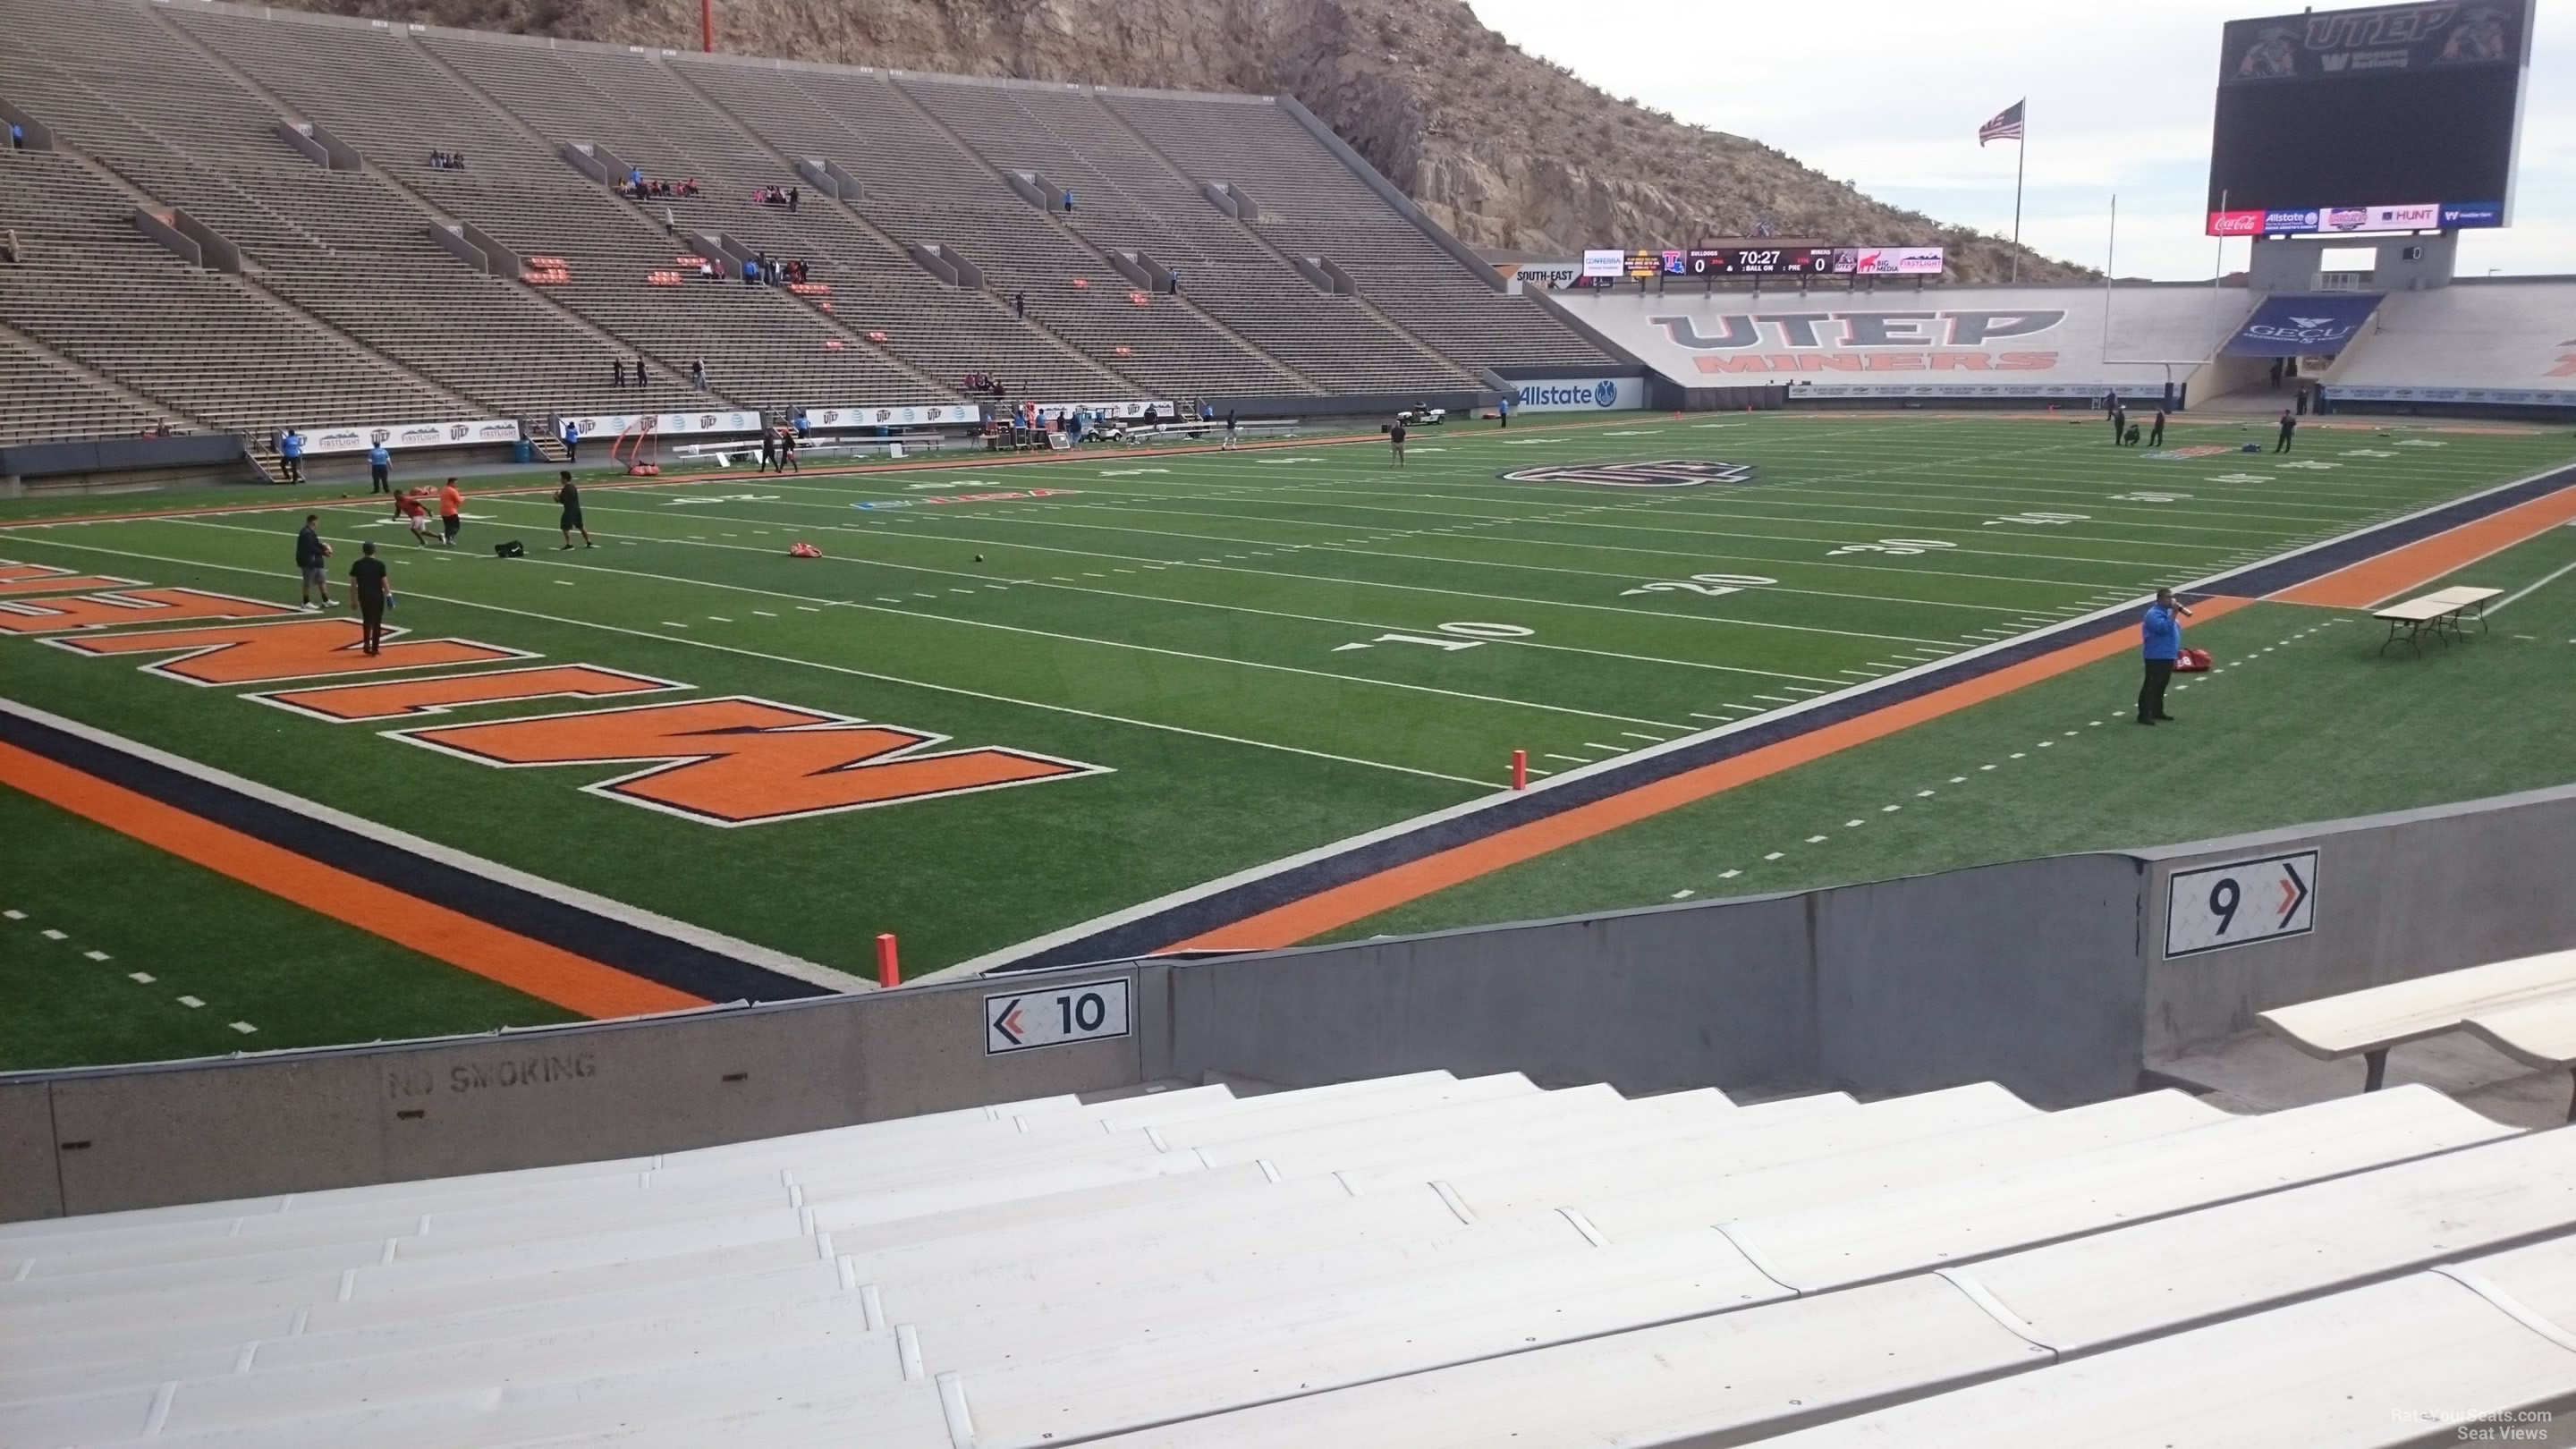 section 10, row 15 seat view  for football - sun bowl